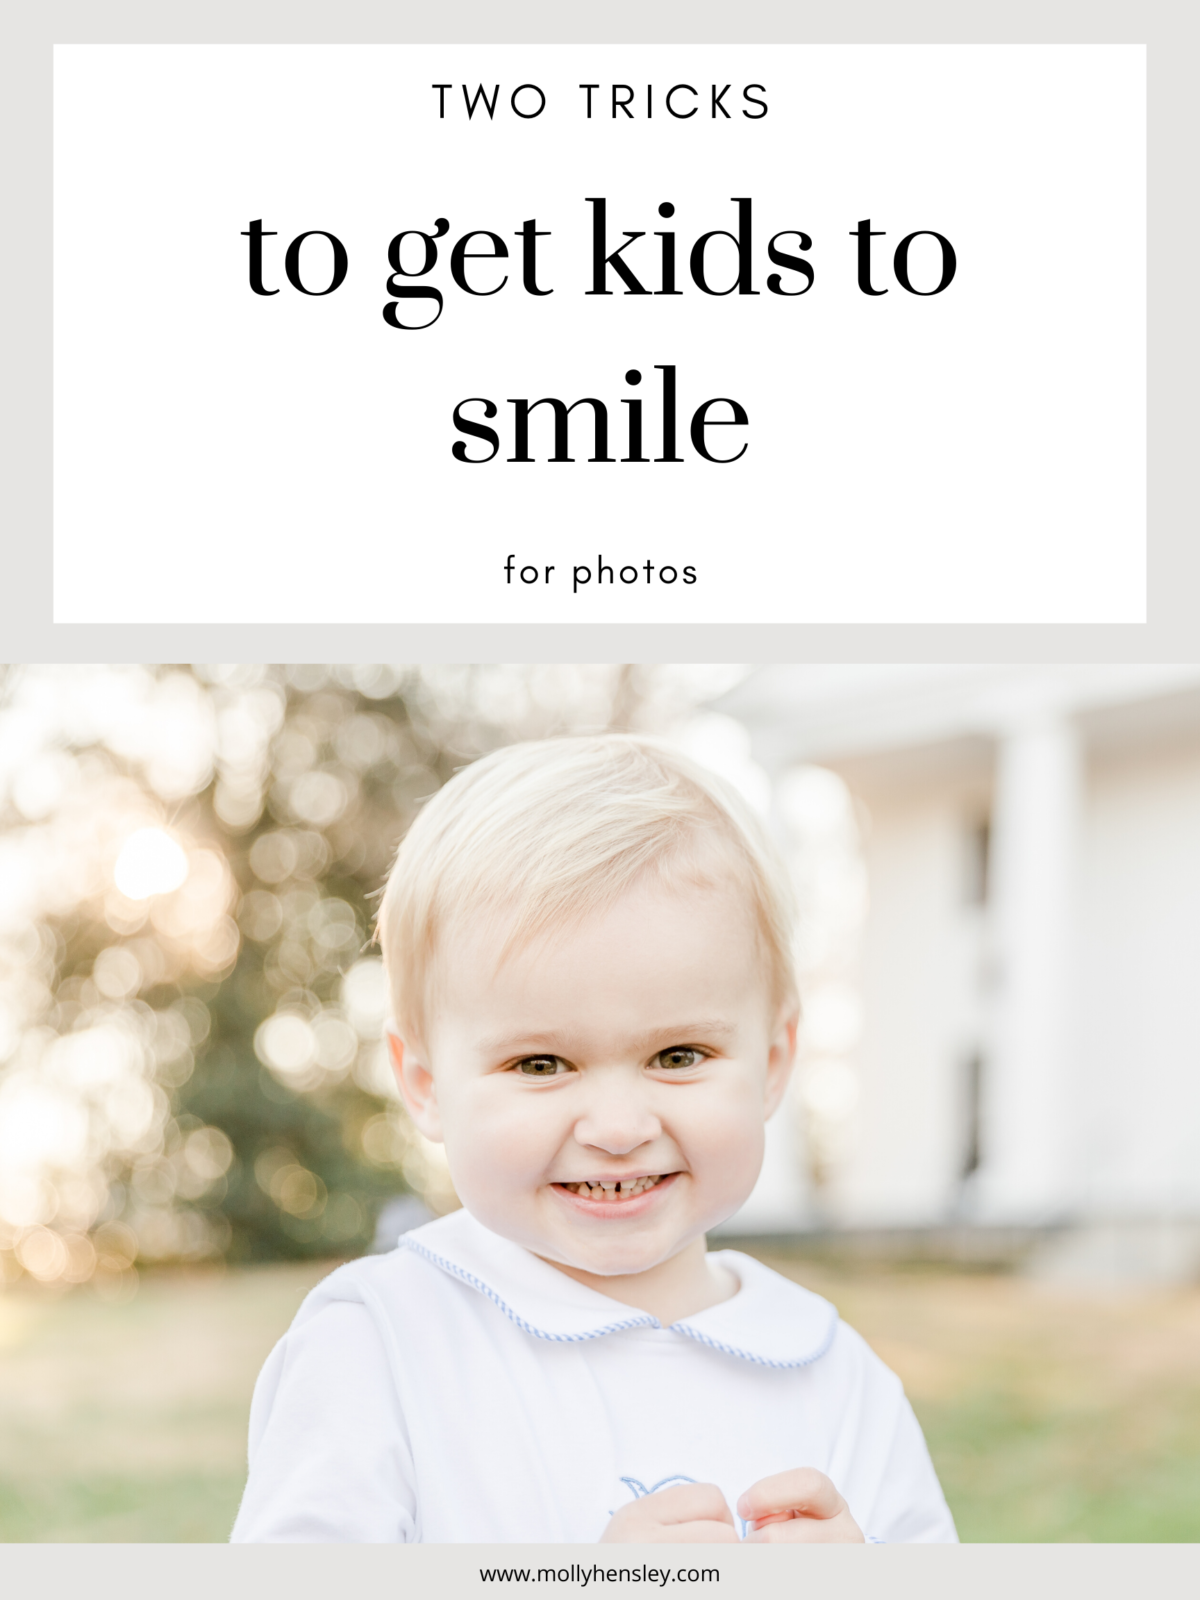 How to get kids to smile for photos